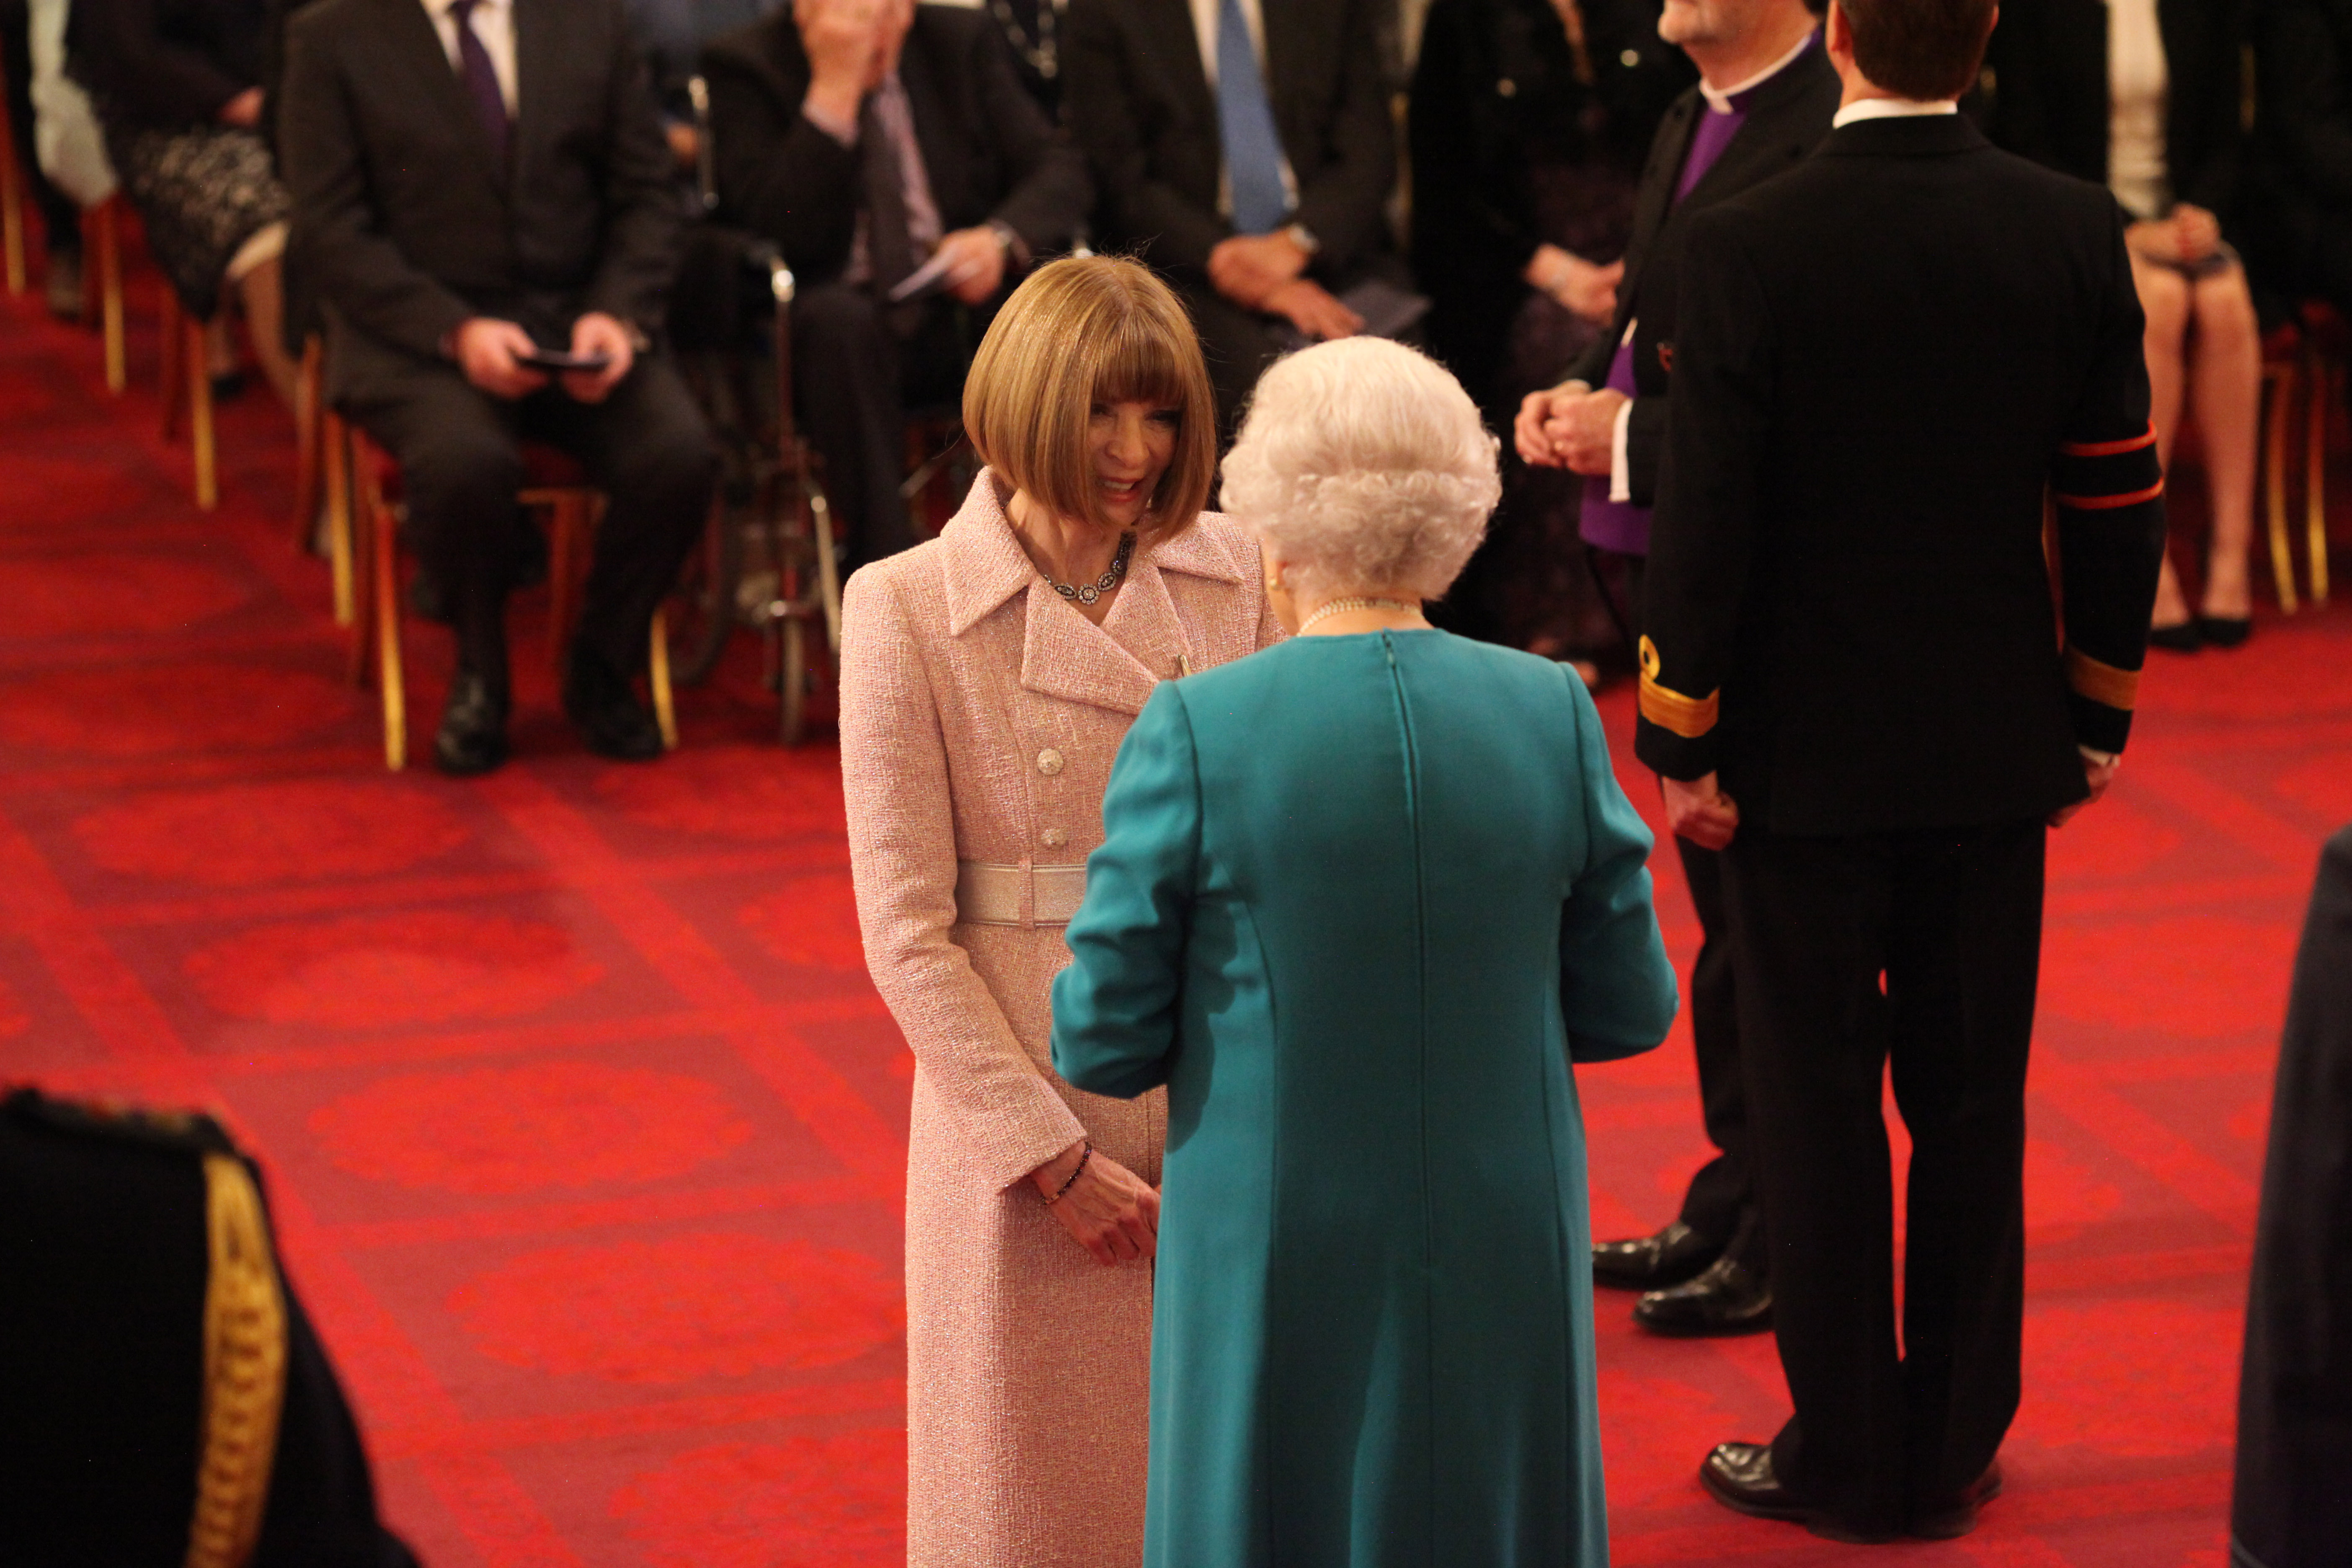 The Queen gives Anna Wintour a damehood at Buckingham Palace